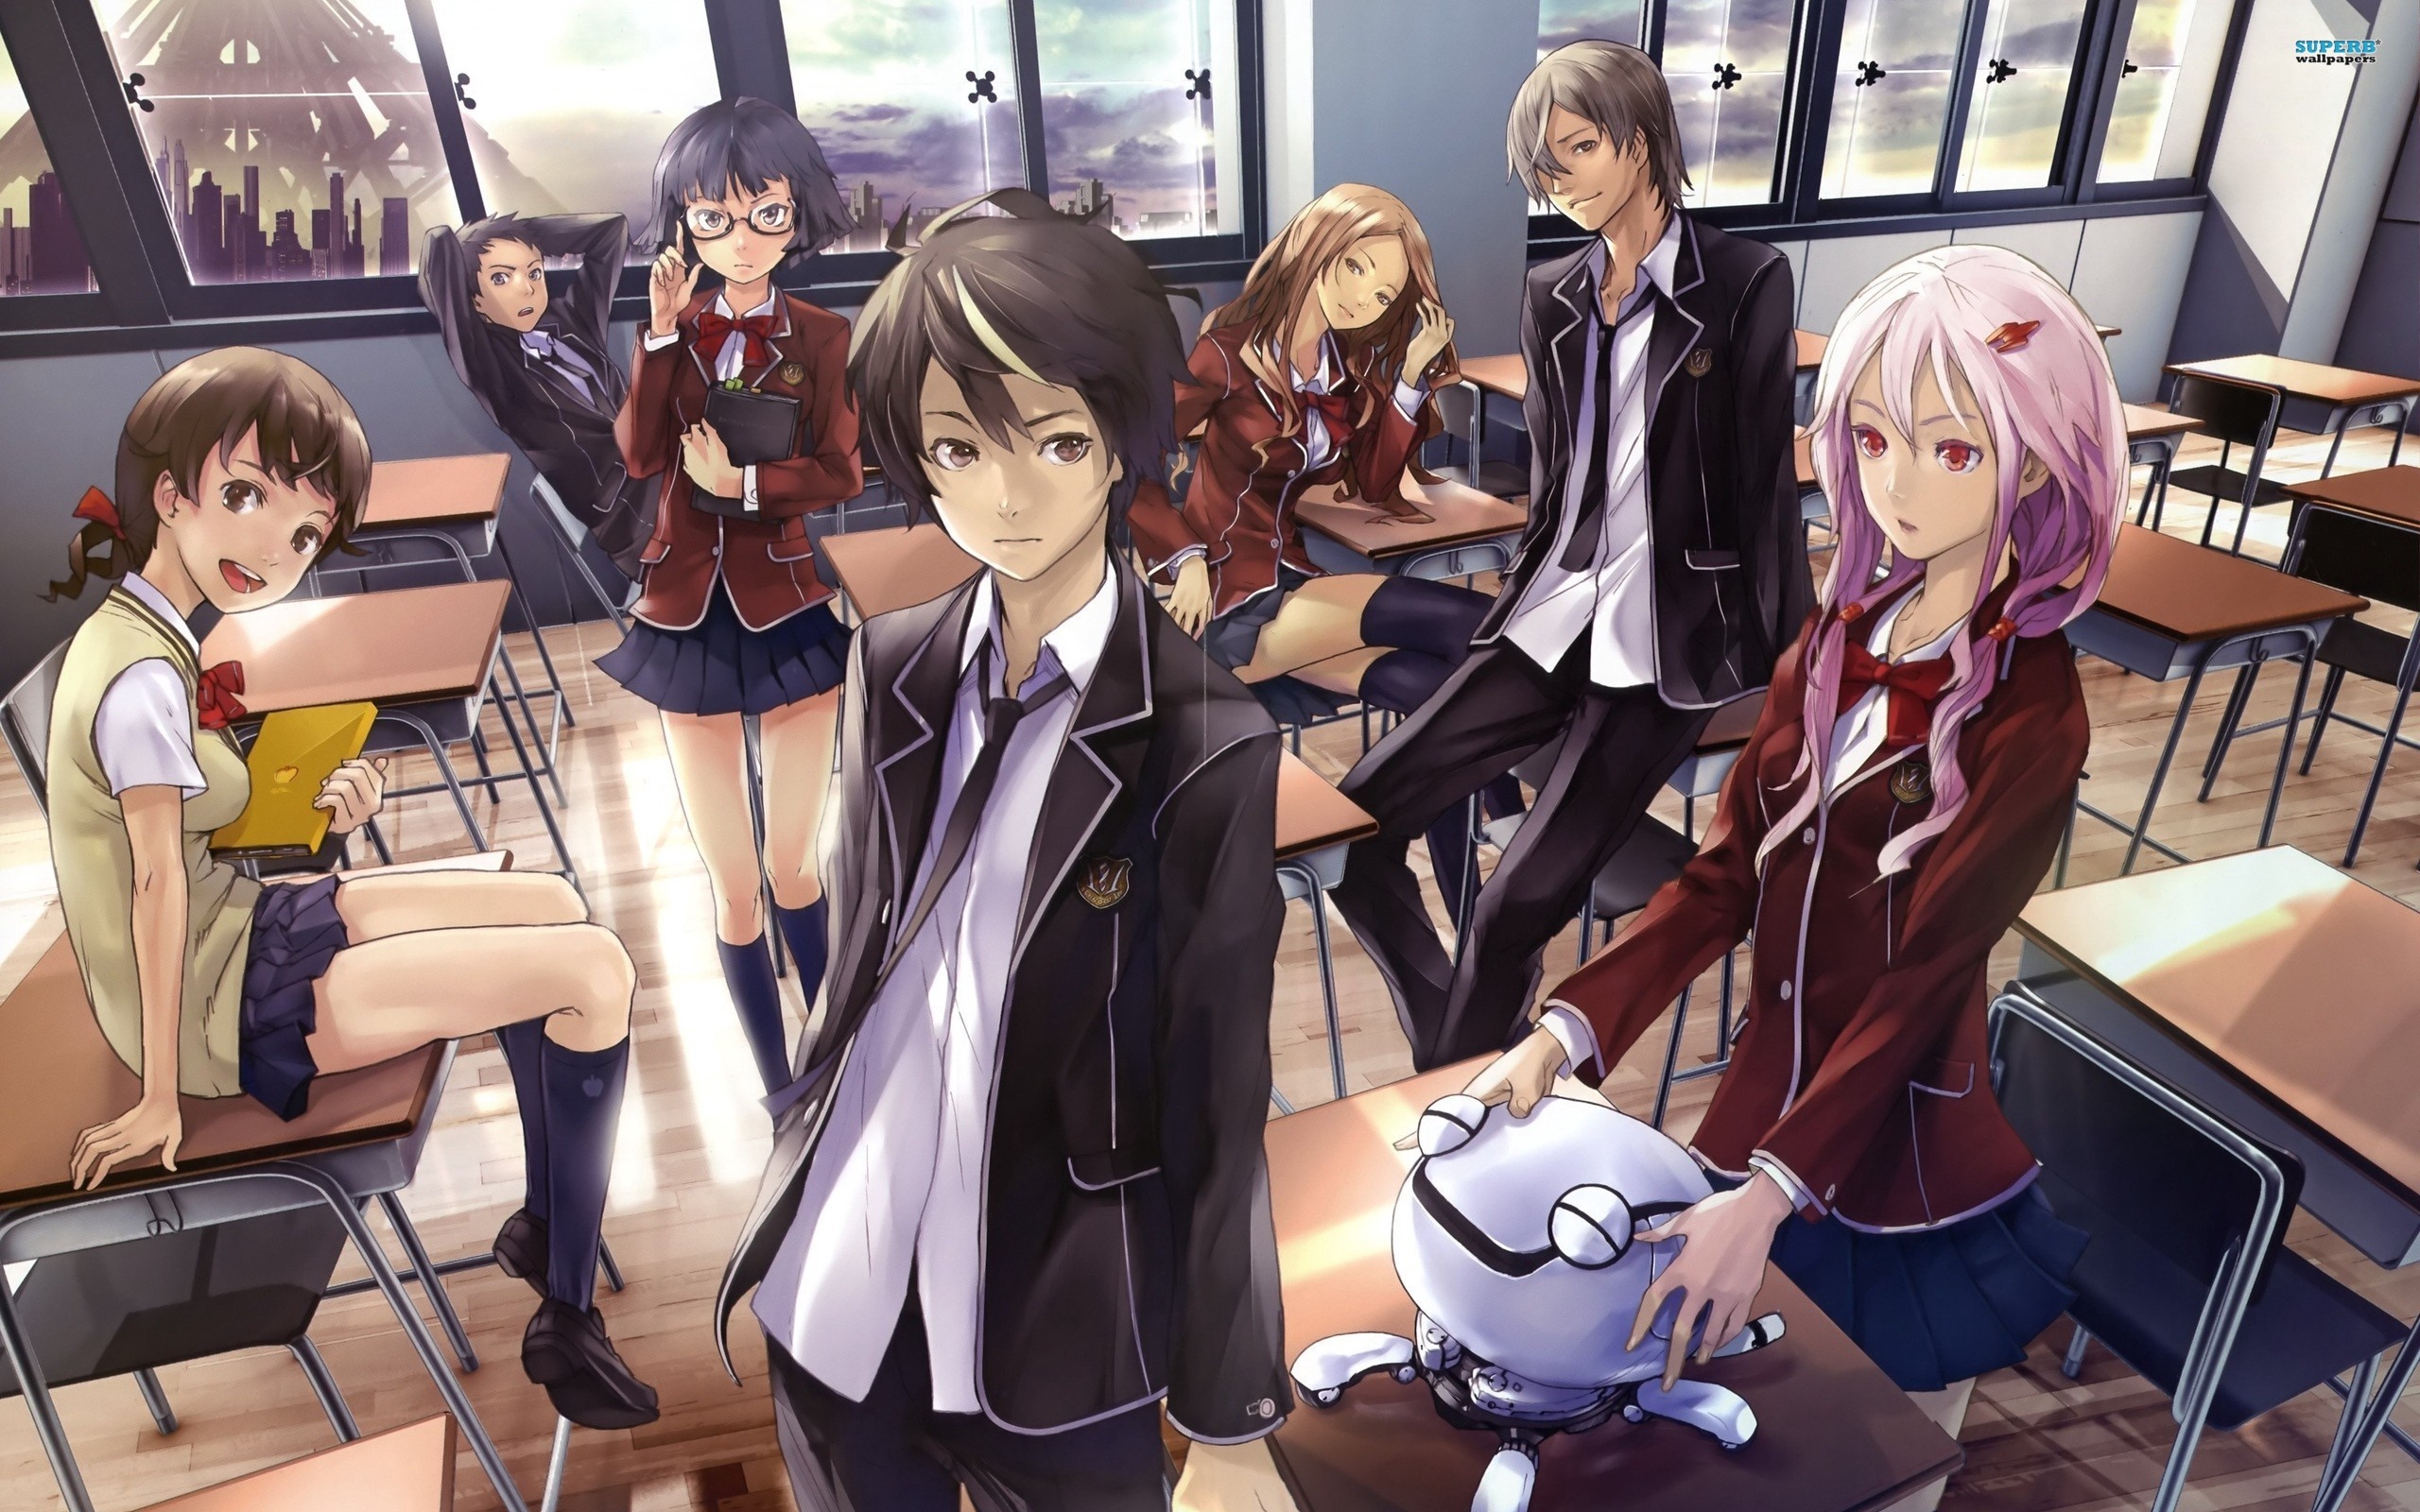 Download wallpaper 2560x1600 anime, guilty crown, students, class